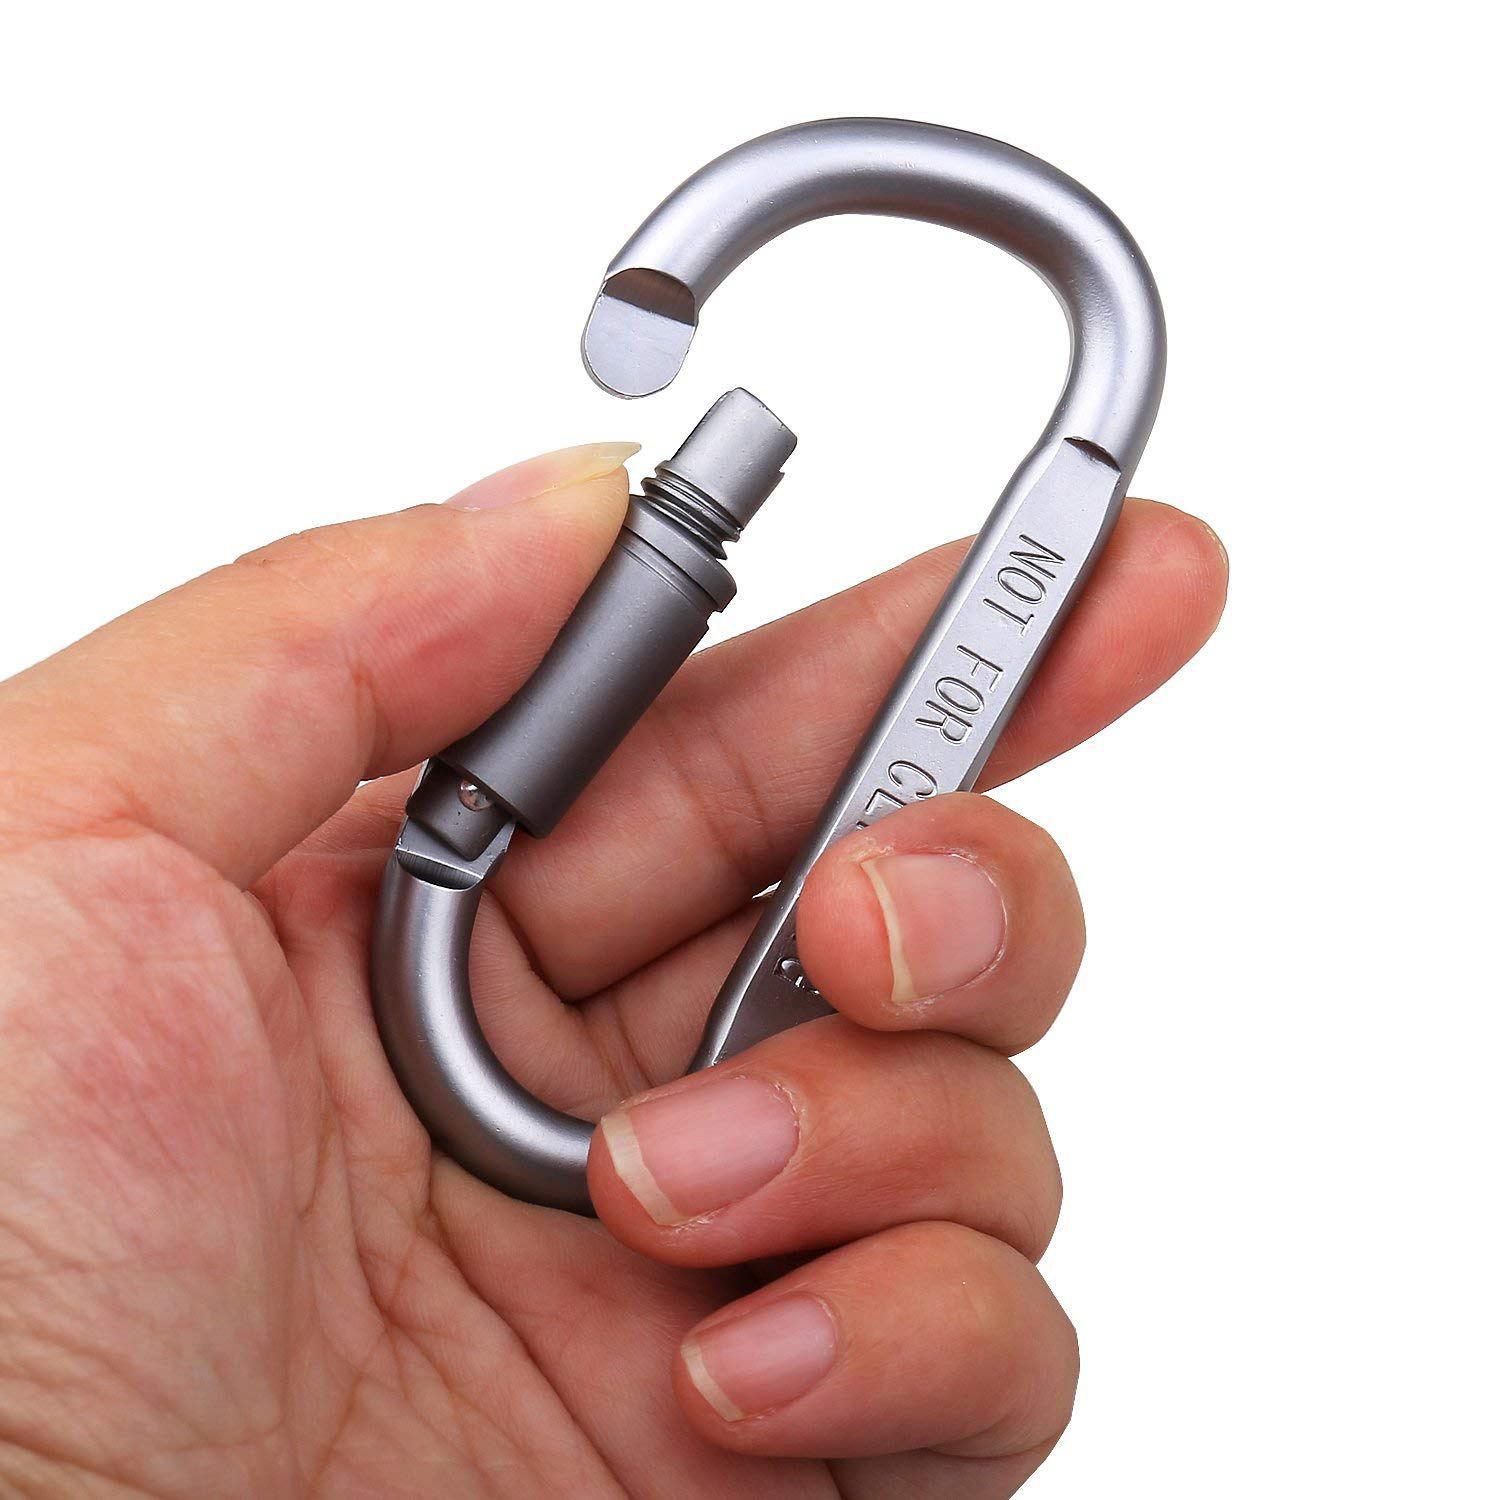 Aluminum alloy D Ring Clip D Shape Super Durable Strong and Large Carabiner keyring Keychain Clip for Outdoor Camping Key Chain Heavy Duty Screw Gate Lock Hooks Spring Link